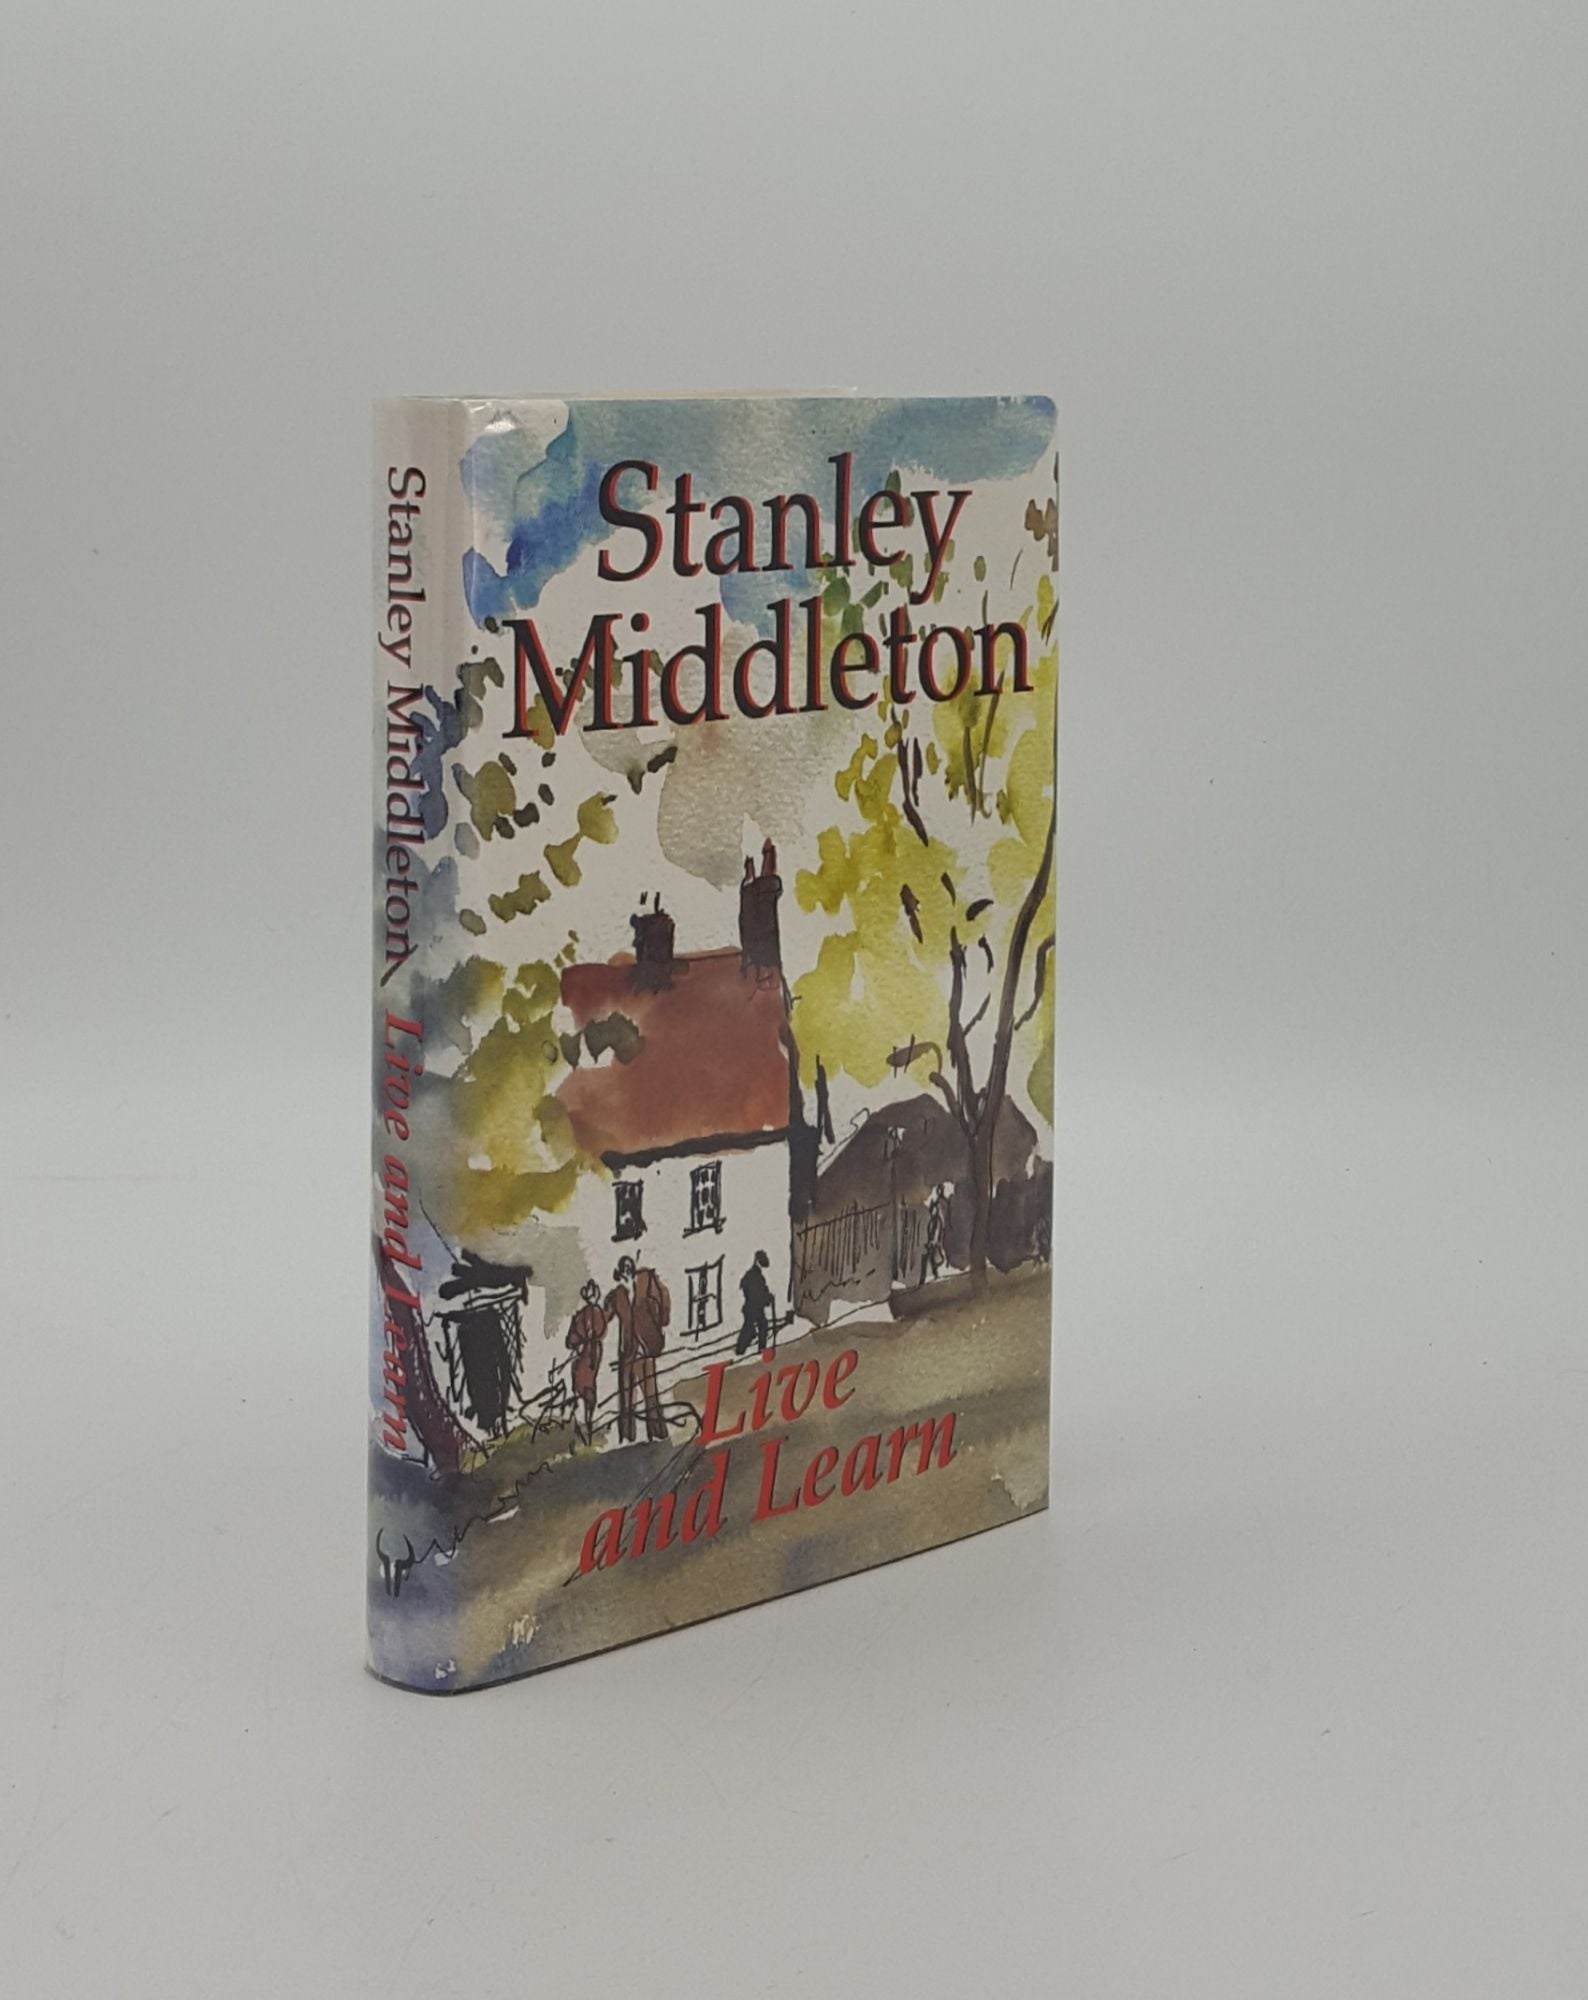 MIDDLETON Stanley - Live and Learn